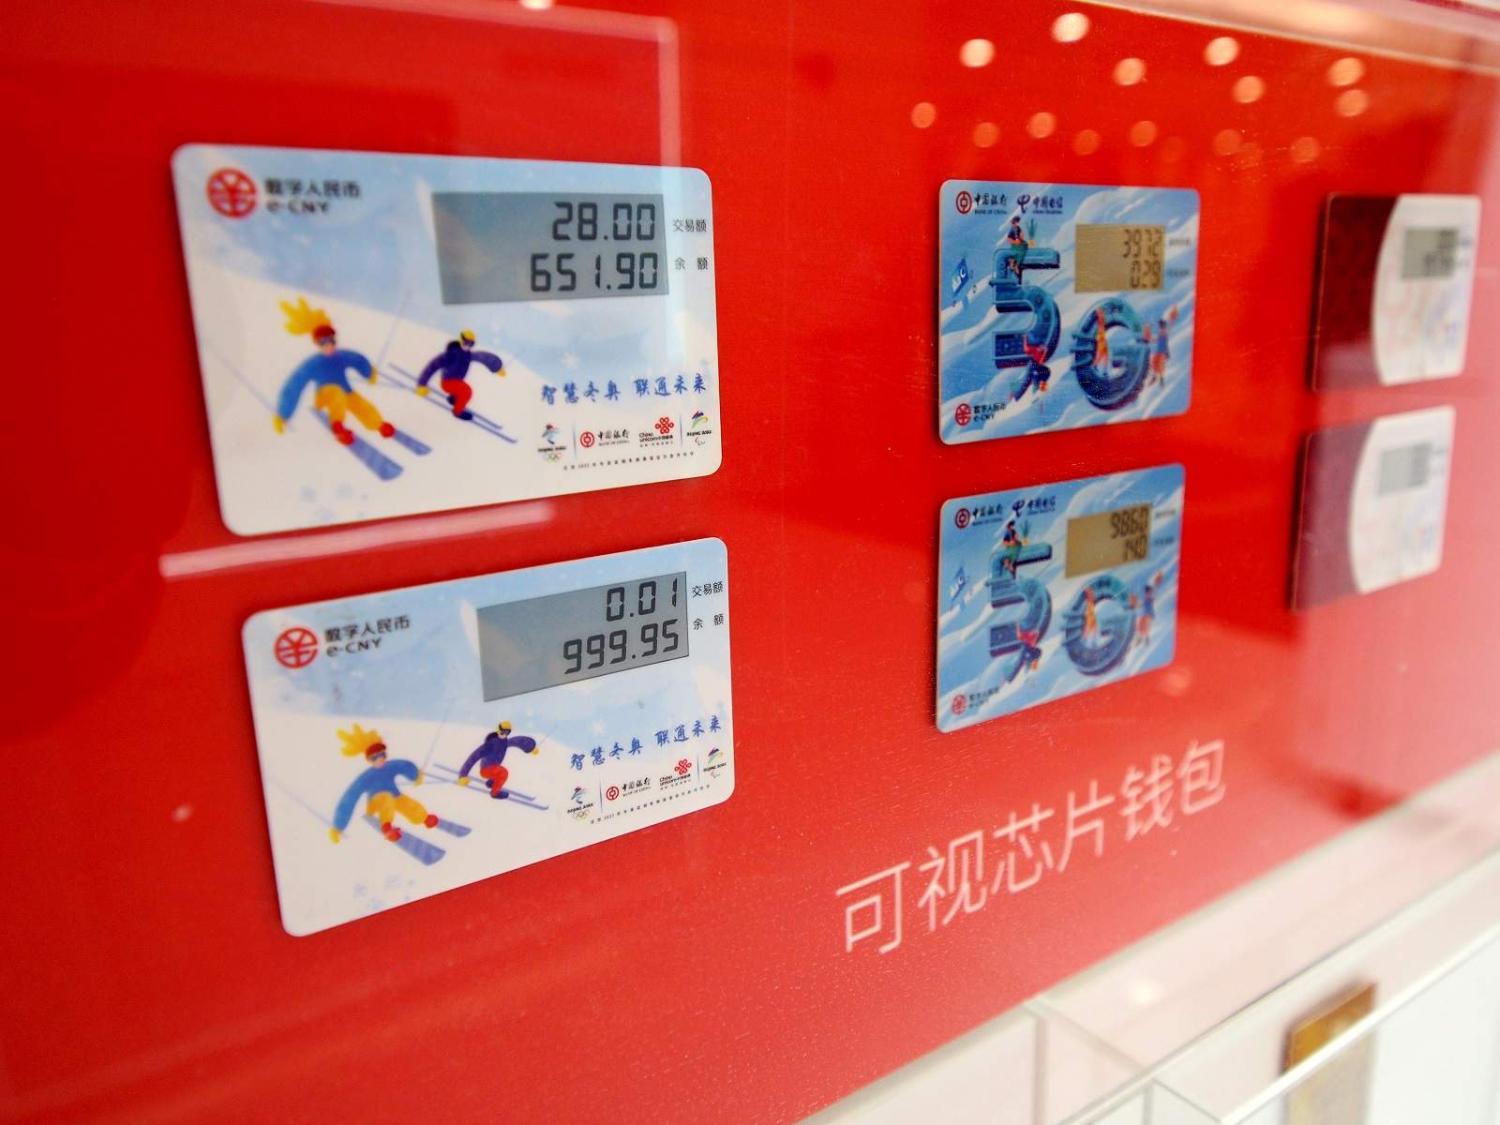 An e-wallet display at the e-CNY pilot Payment Experience Exhibition for the Winter Olympic Games in Beijing, 21 October 2021 (Costfoto/Barcroft Media via Getty Images)